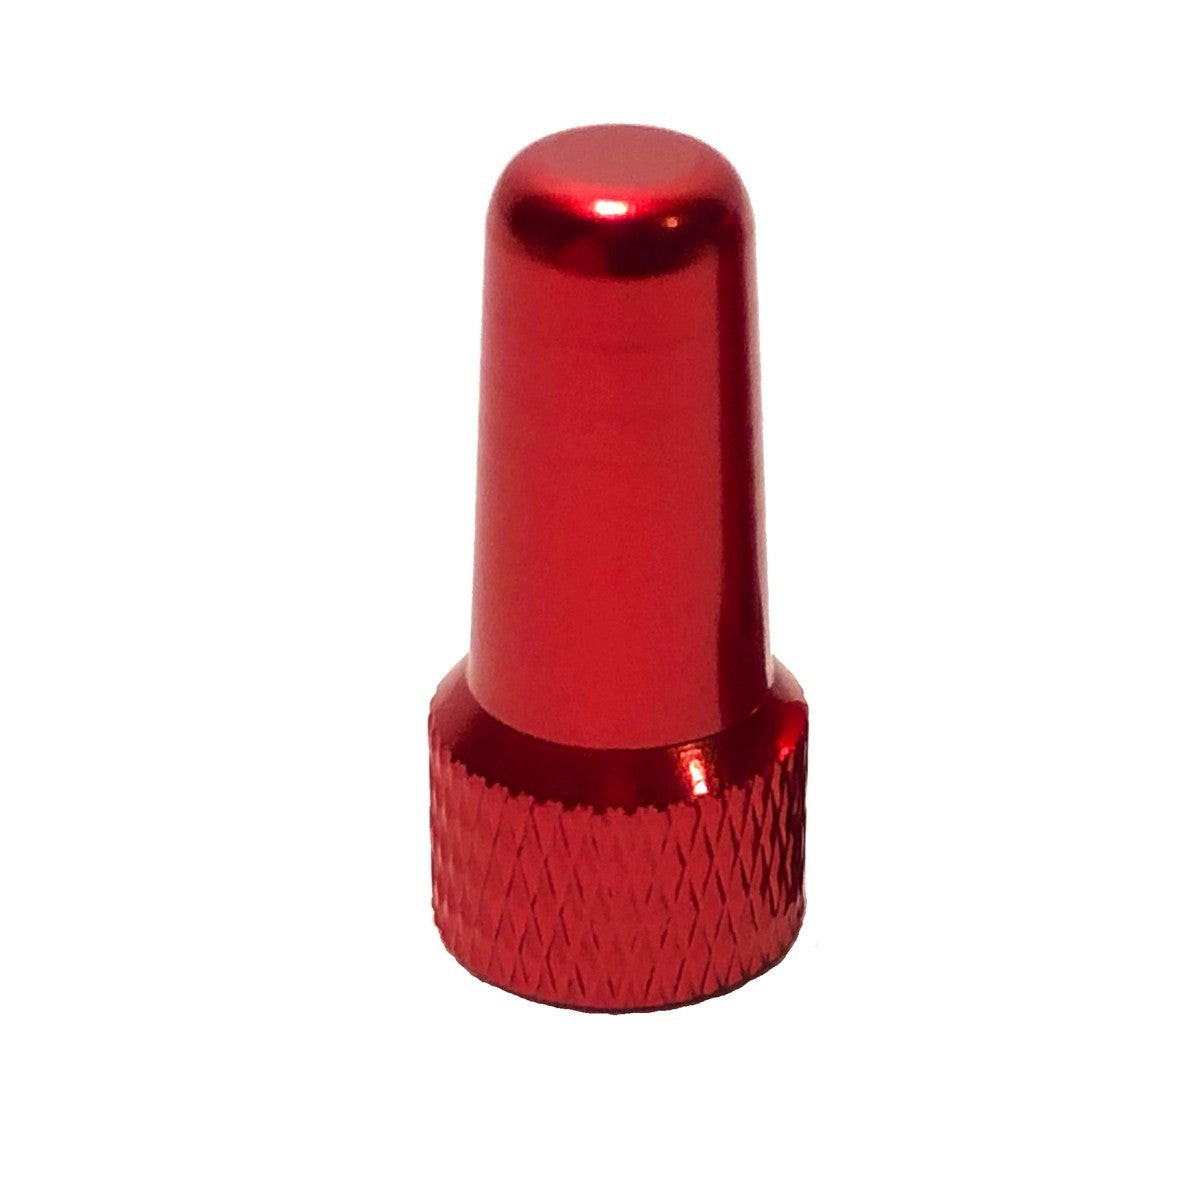 RNX Presta Valve Cap Dust Cover for Bicycle Wheels and Tubes